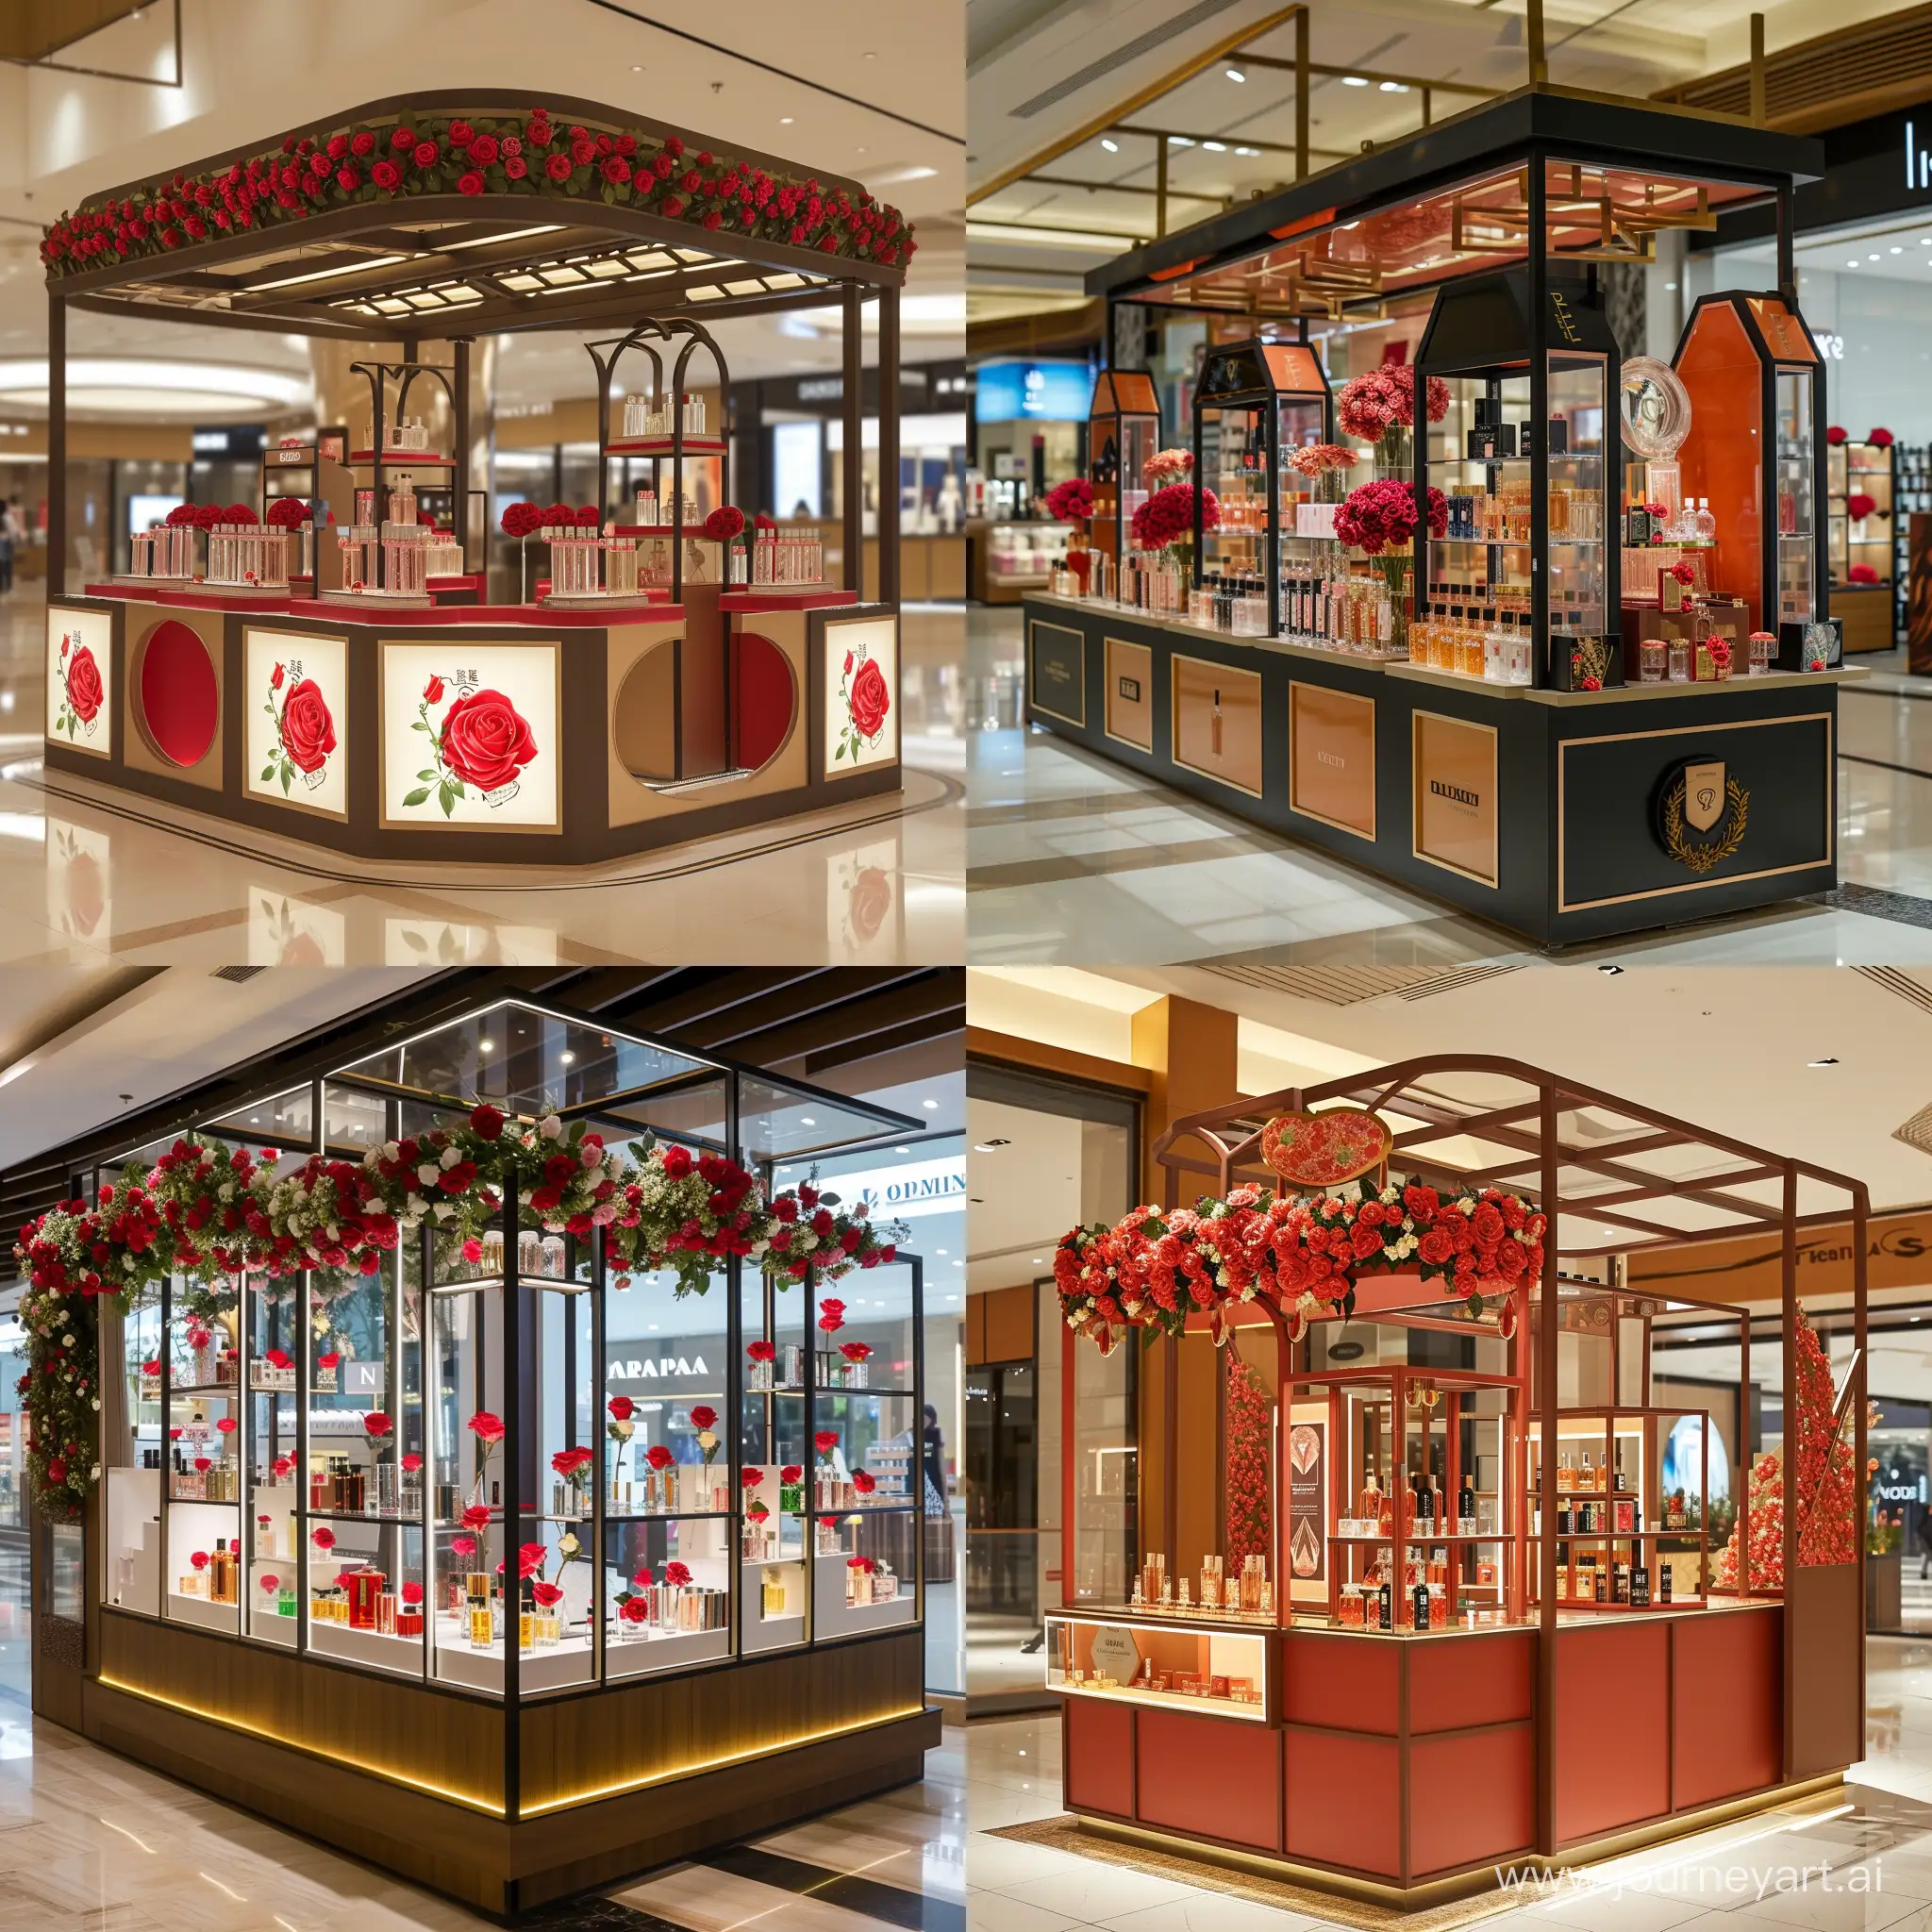 Elegant-Perfume-Display-at-3x2-Meter-Mall-Kiosk-with-Rose-Accents